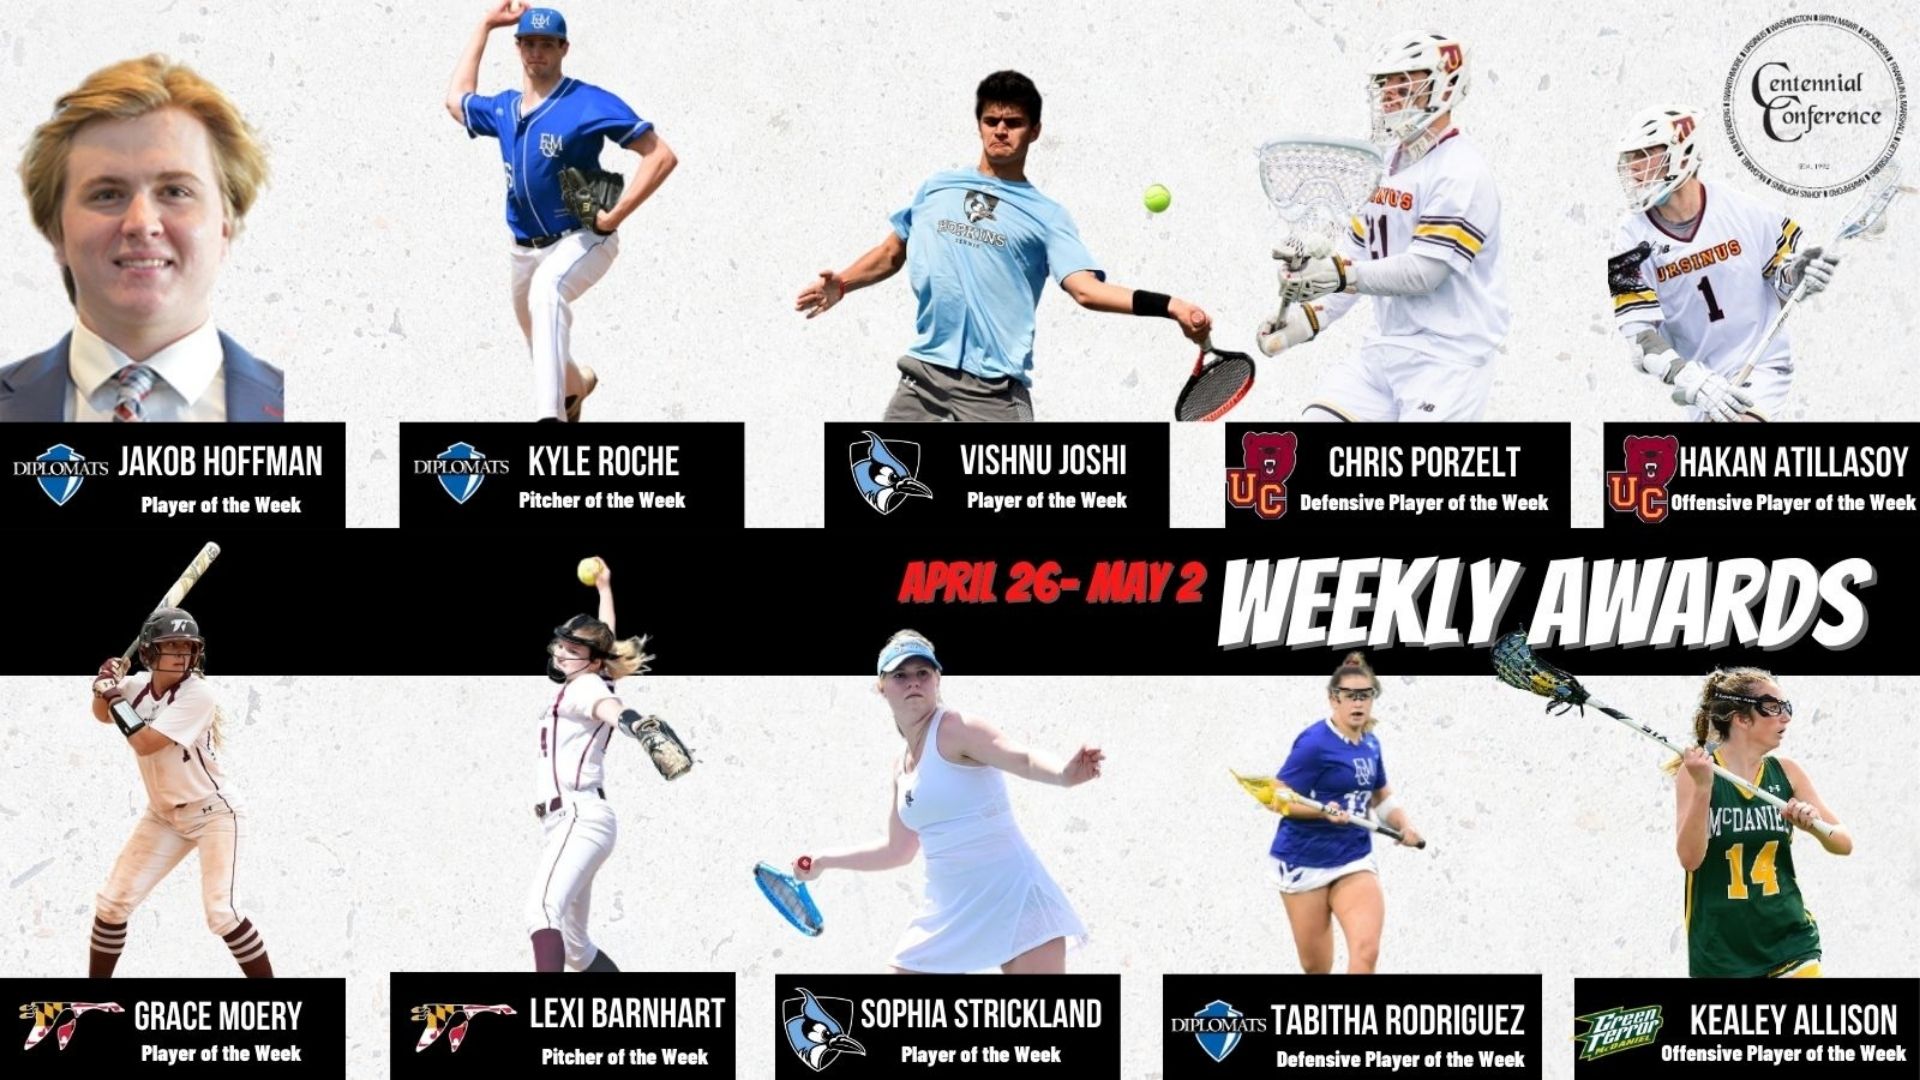 Centennial Conference Athletes of the Week - Apr. 26 - May 2